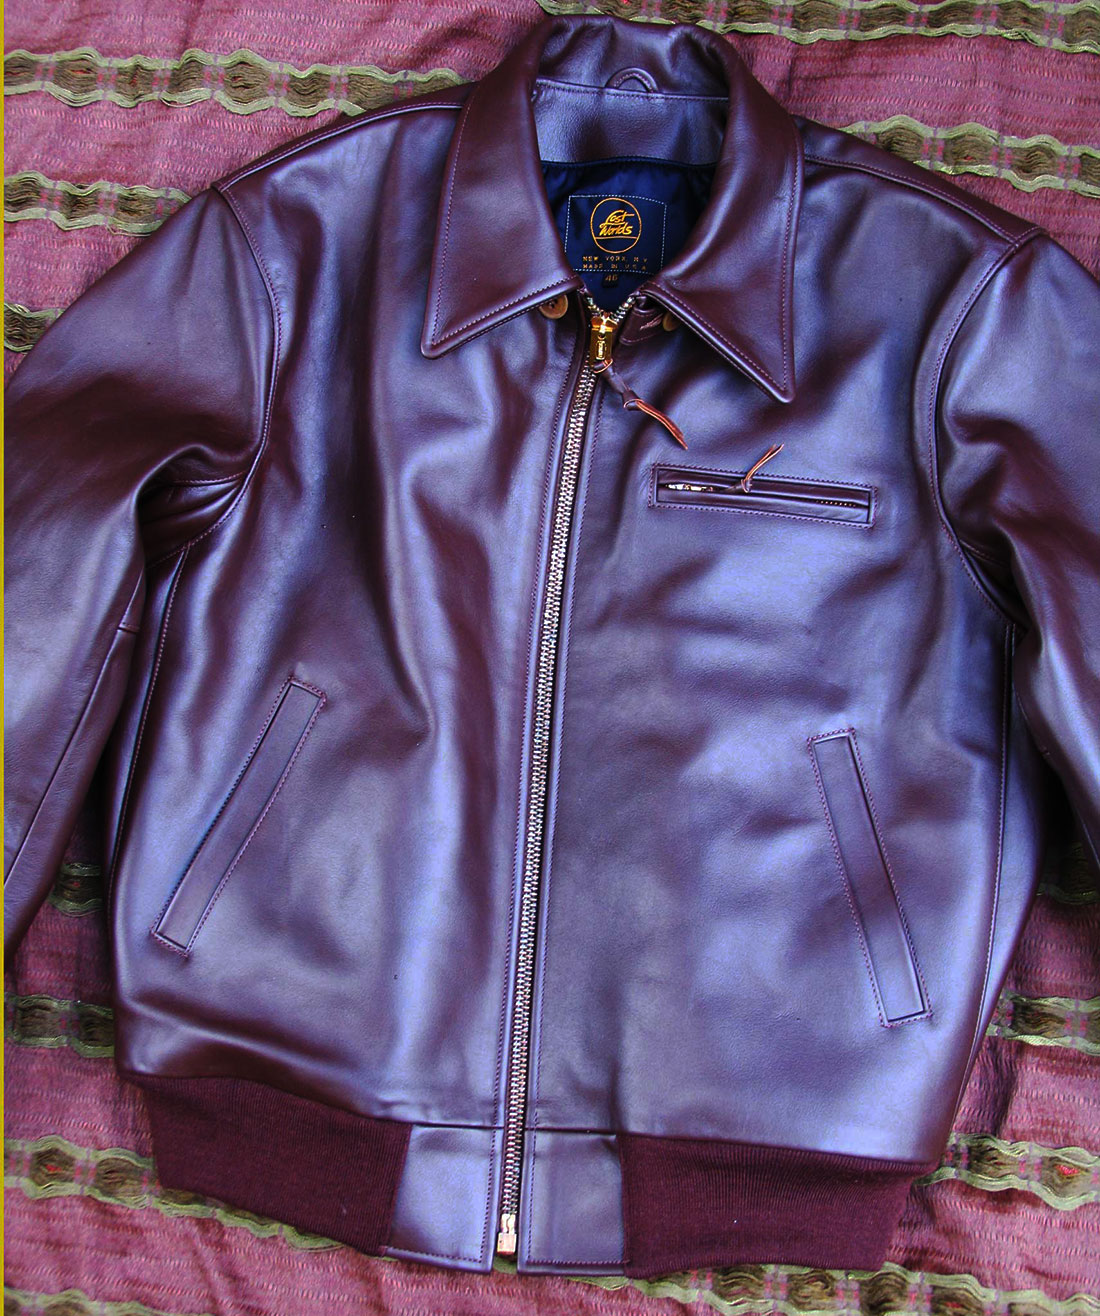 Vintage 19450sVintage Russet Brown Horsehide Motorcycle Jacket Lost Worlds NY USA